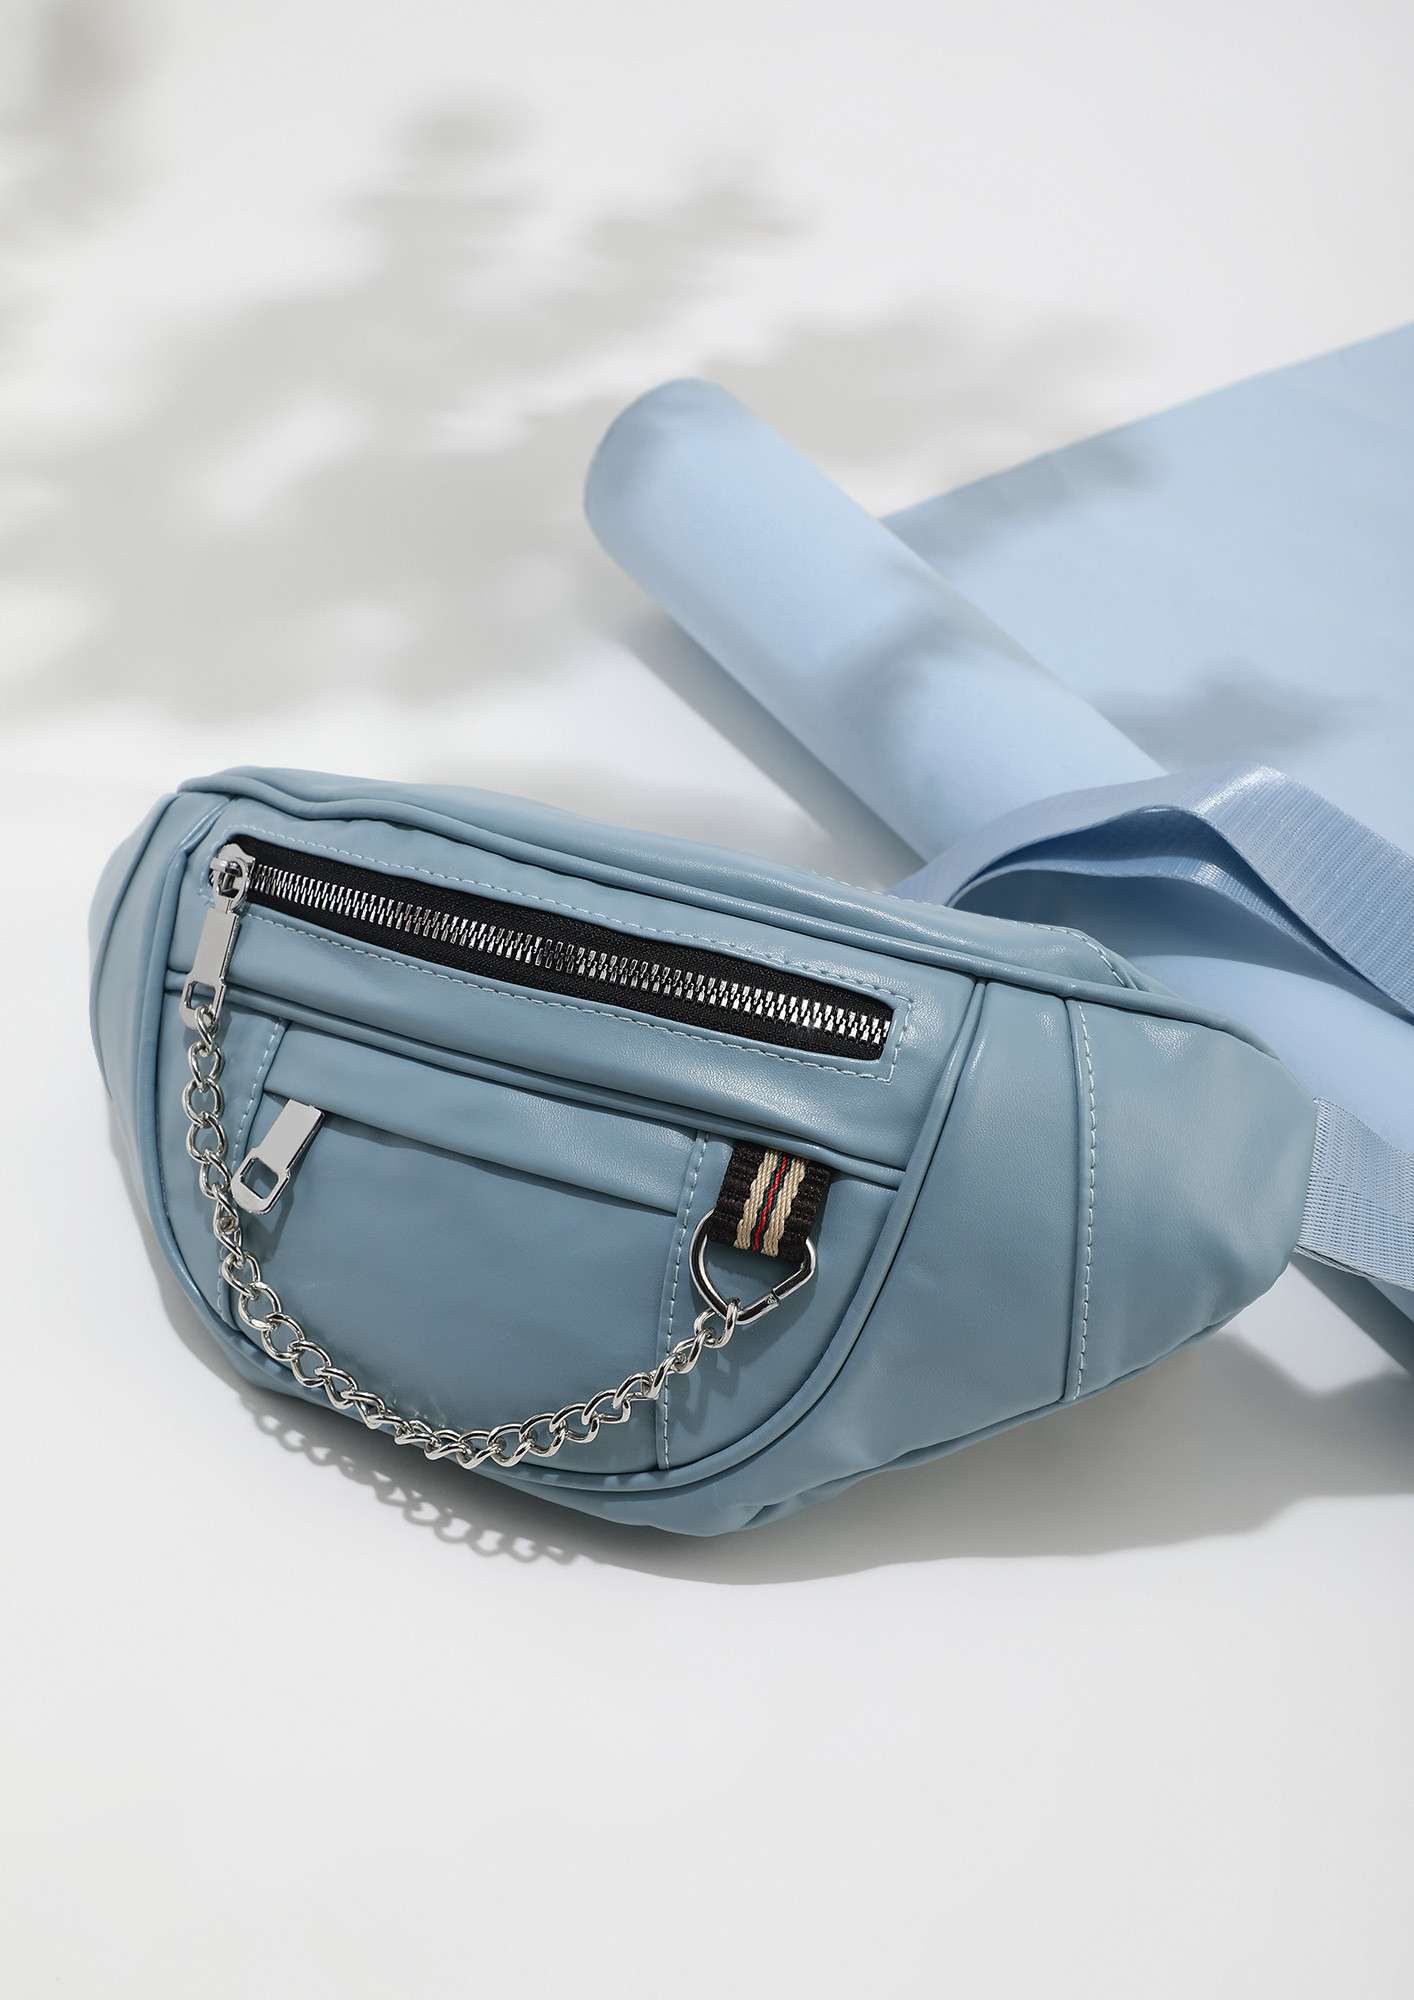 CLOSE TO PASTELS BLUE FANNY PACK